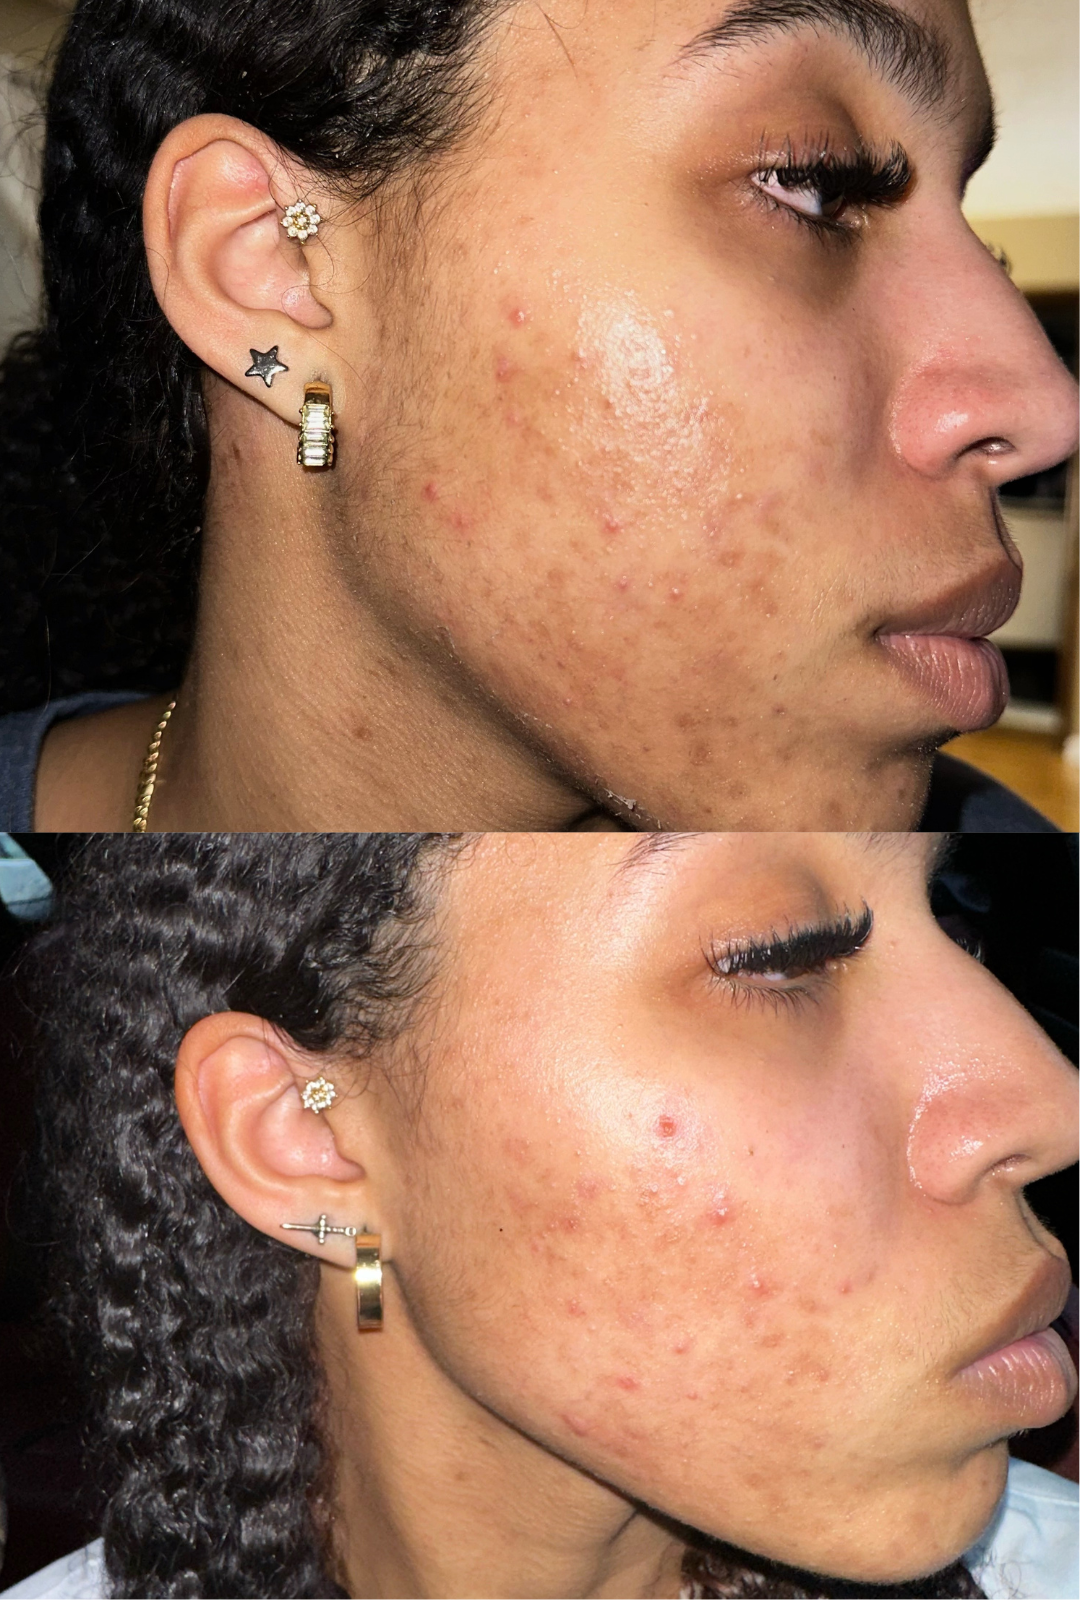 7 days post microneedling with daily PRX⁸ application